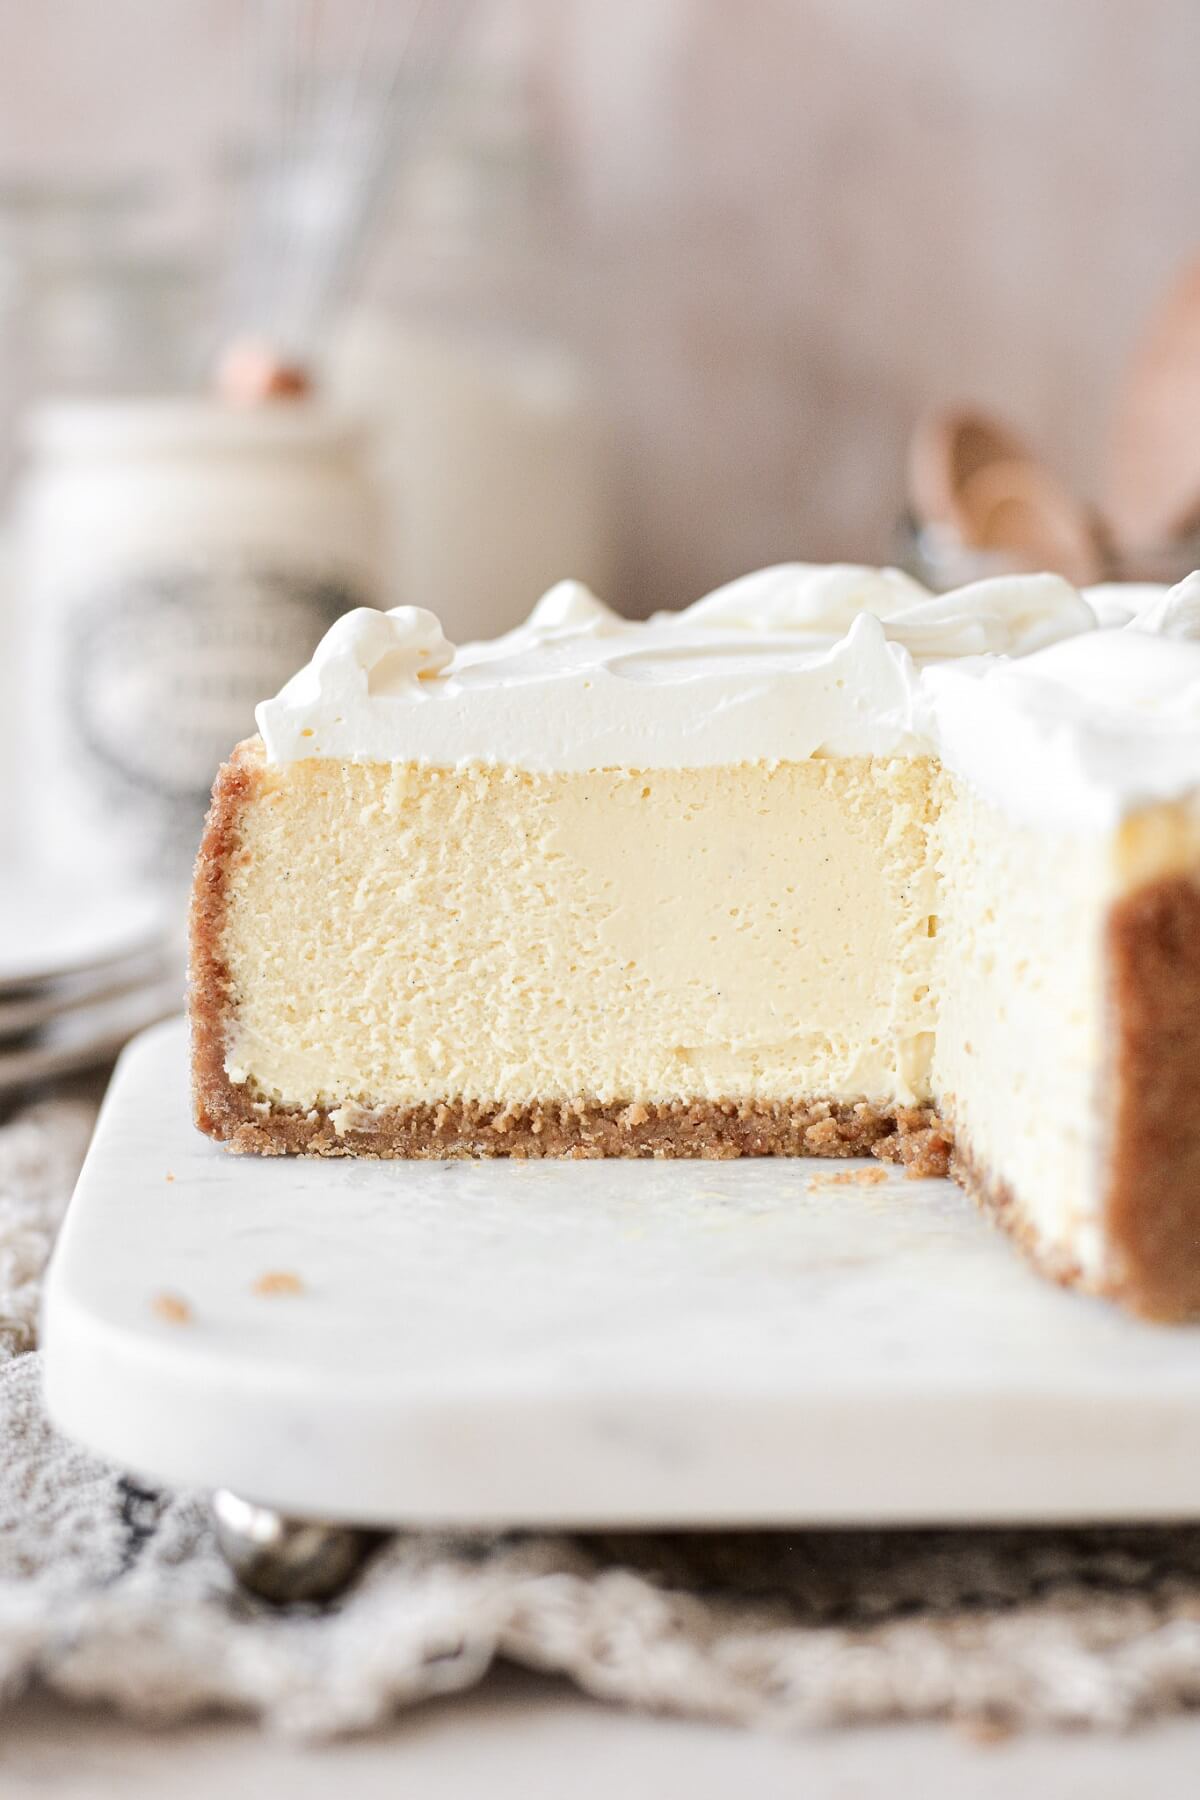 Creamy vanilla cheesecake topped with whipped cream, with a piece cut.